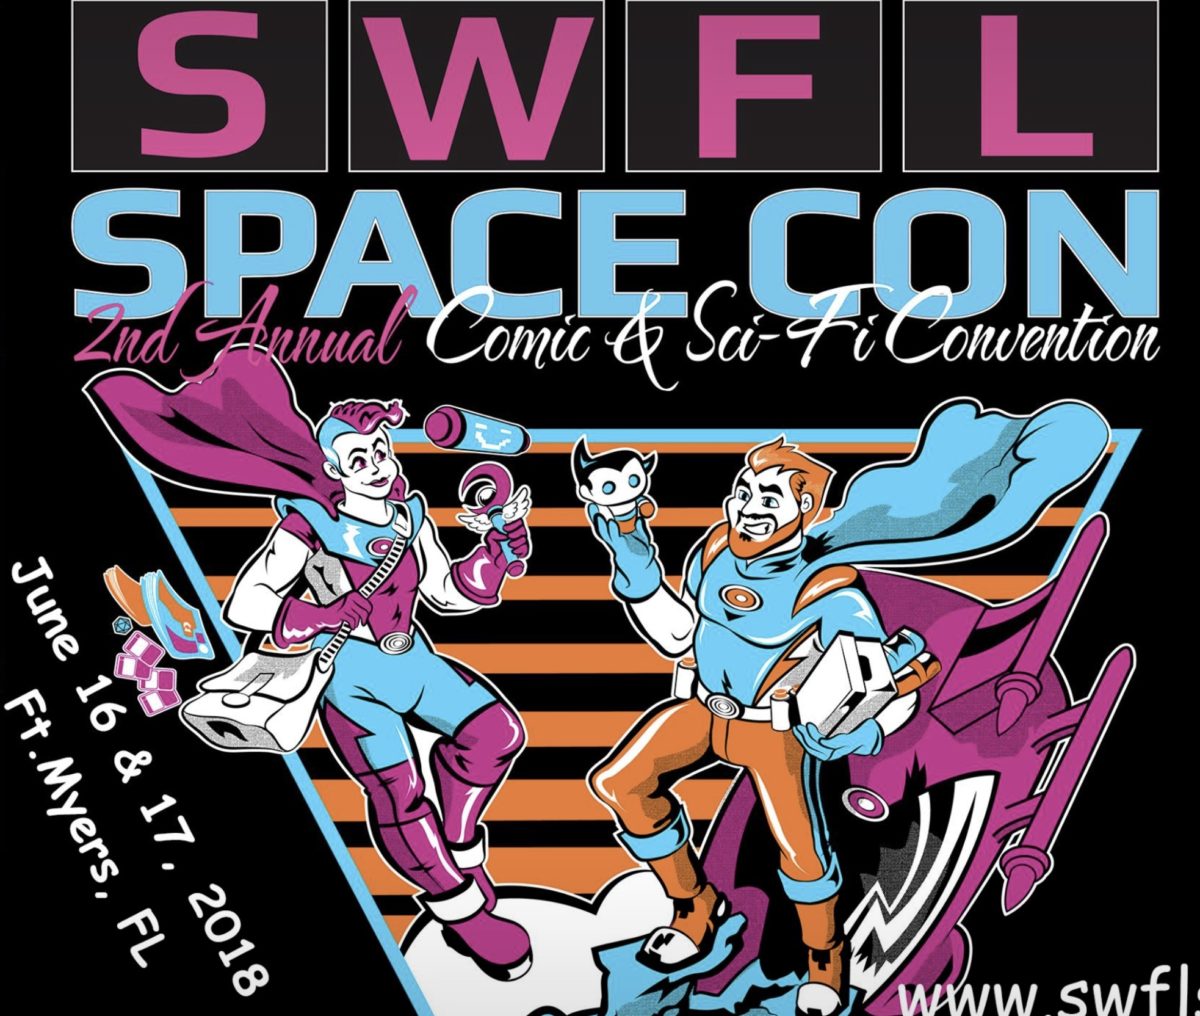 ITS ABOUT TO GO DOWN in  FORT-MYERS At The  2nd Annual SWFL SpaceCon, Full of Appearances Mr Andersin, INDIE ADVOCATES, Andrea Lorenzo Molinari, James Haick and MORE ( To many to List ) Panels and More Fun for the WHOLE FAMILY June 16th and 17th